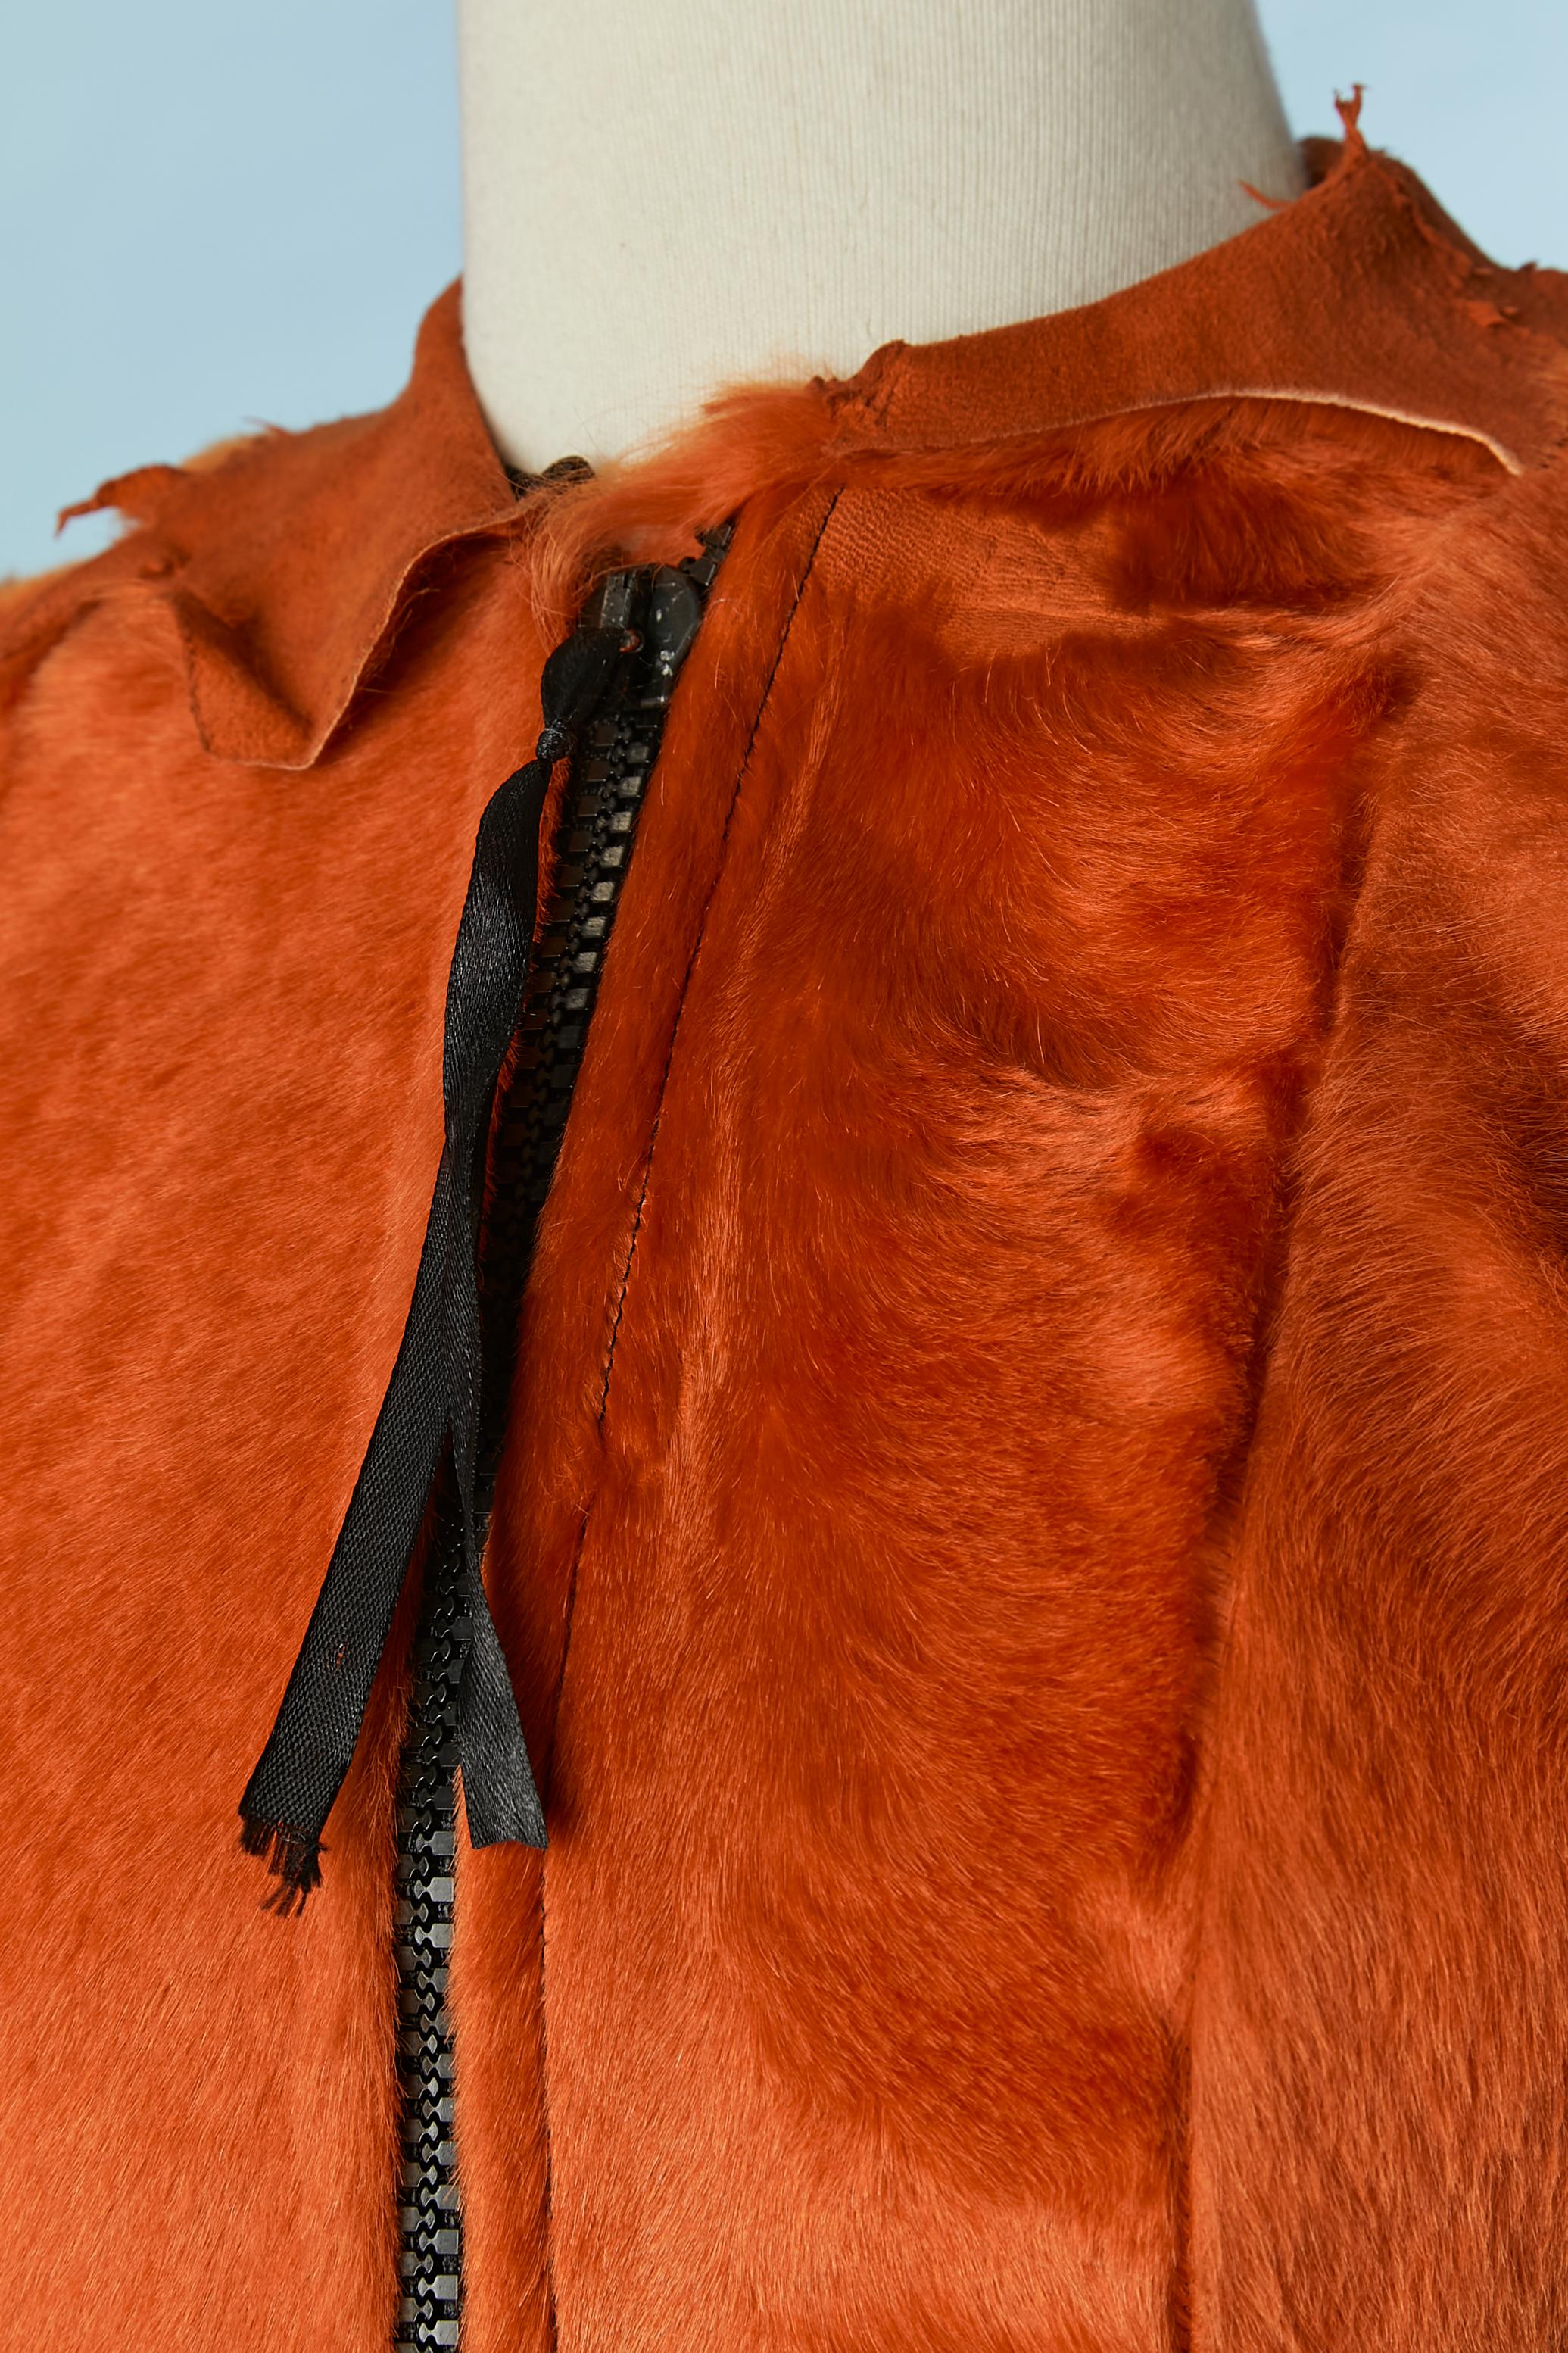 Orange furs vest with zip closure and topstitched on edge Oscar Carvallo  In Excellent Condition For Sale In Saint-Ouen-Sur-Seine, FR